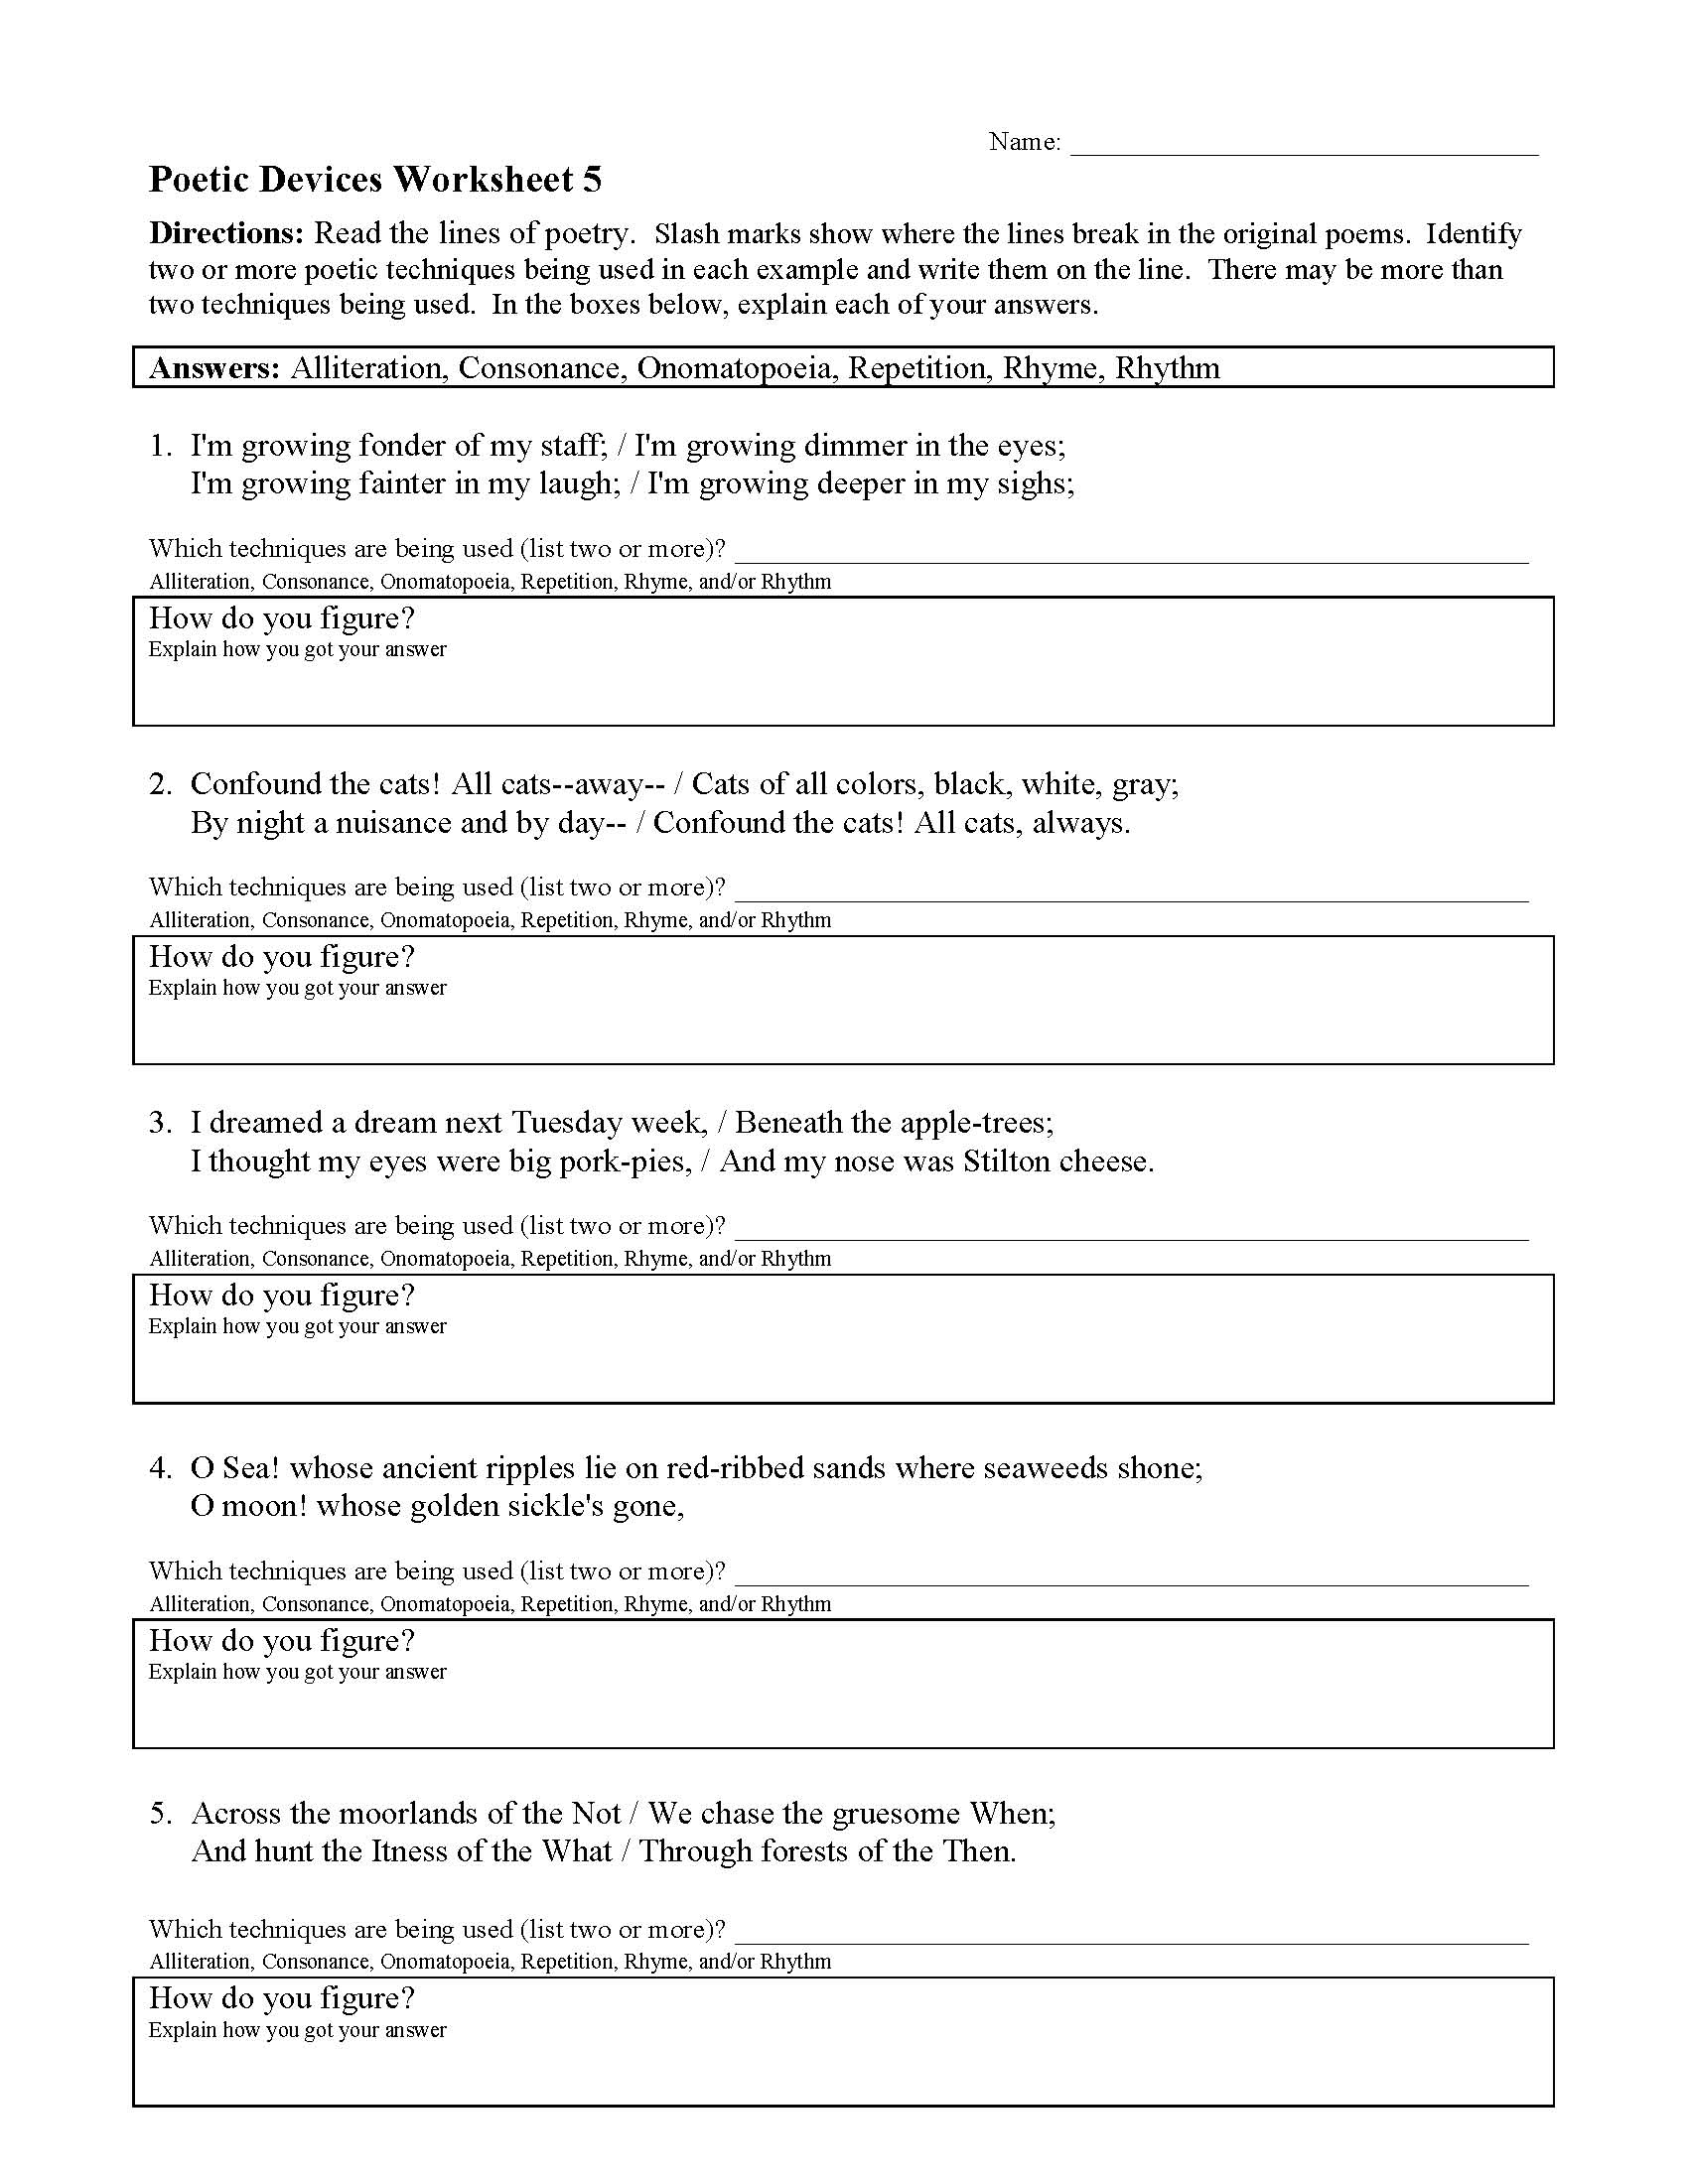 Poetic Devices Worksheet 11  Reading Activity With Poetic Devices Worksheet 1